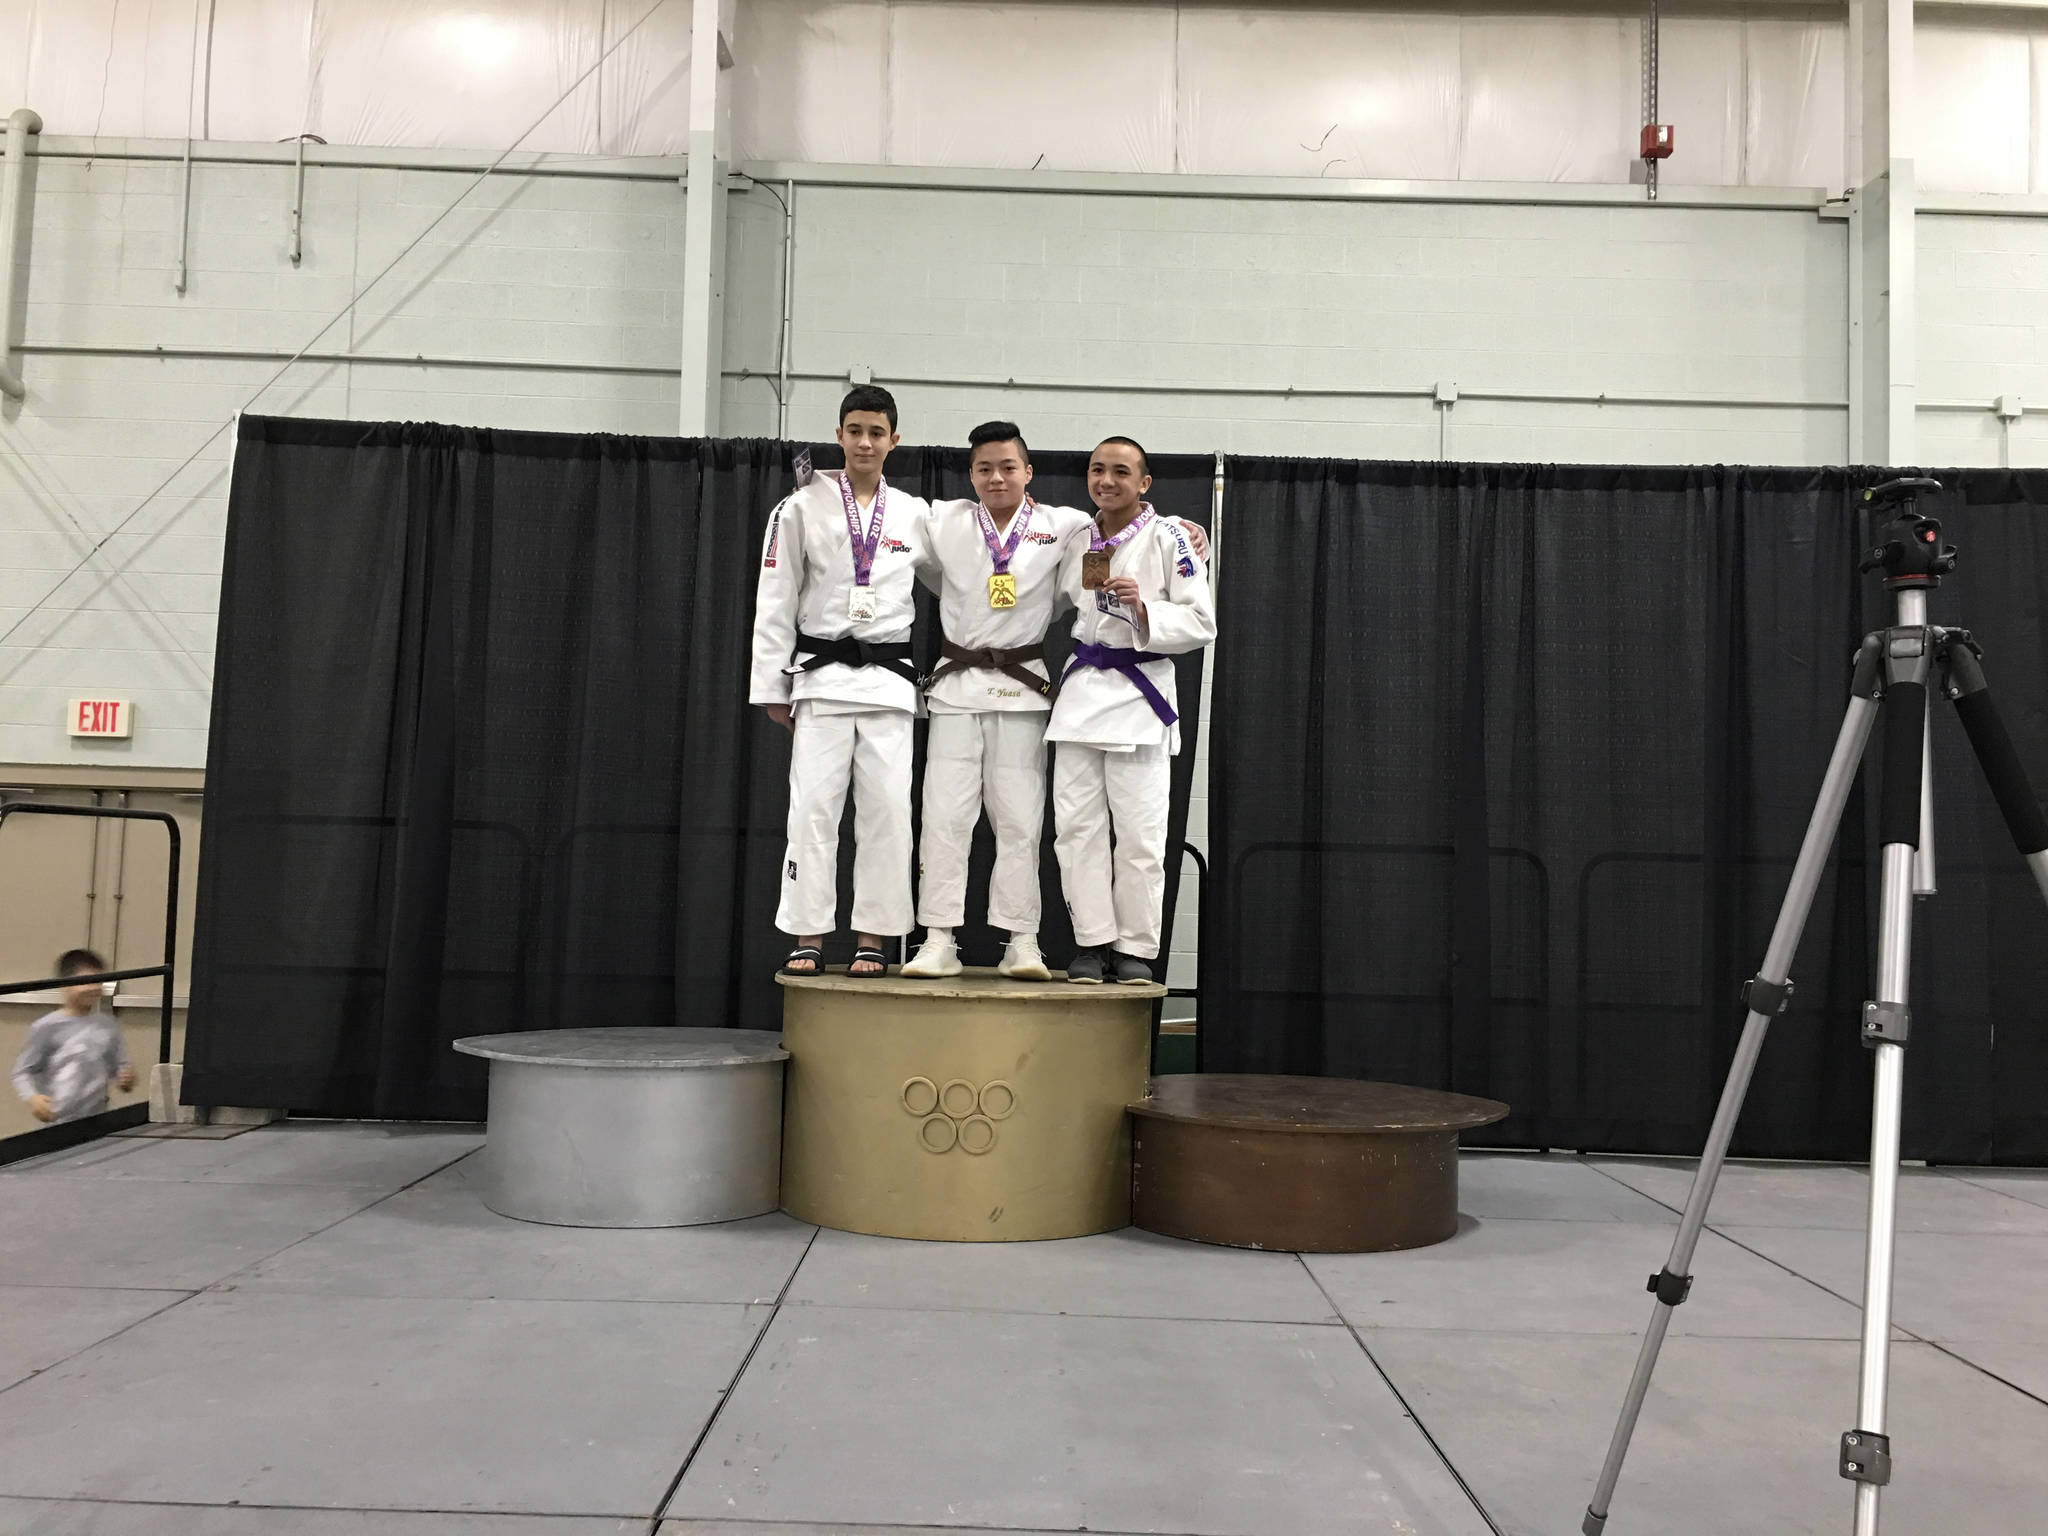 Photo courtesy of Mark Yuasa                                Mercer Island Islanders freshman Tegan Yuasa, center, earned first place in the Cadet -50 kilogram division at the USA Judo Scholastic National Championships on March 3-4 in York, Pennsylvania. Yuasa will also represent Team USA at the 2018 Cadet Pan American Championships on July 6, 2018 in Buenos Aires, Argentina.